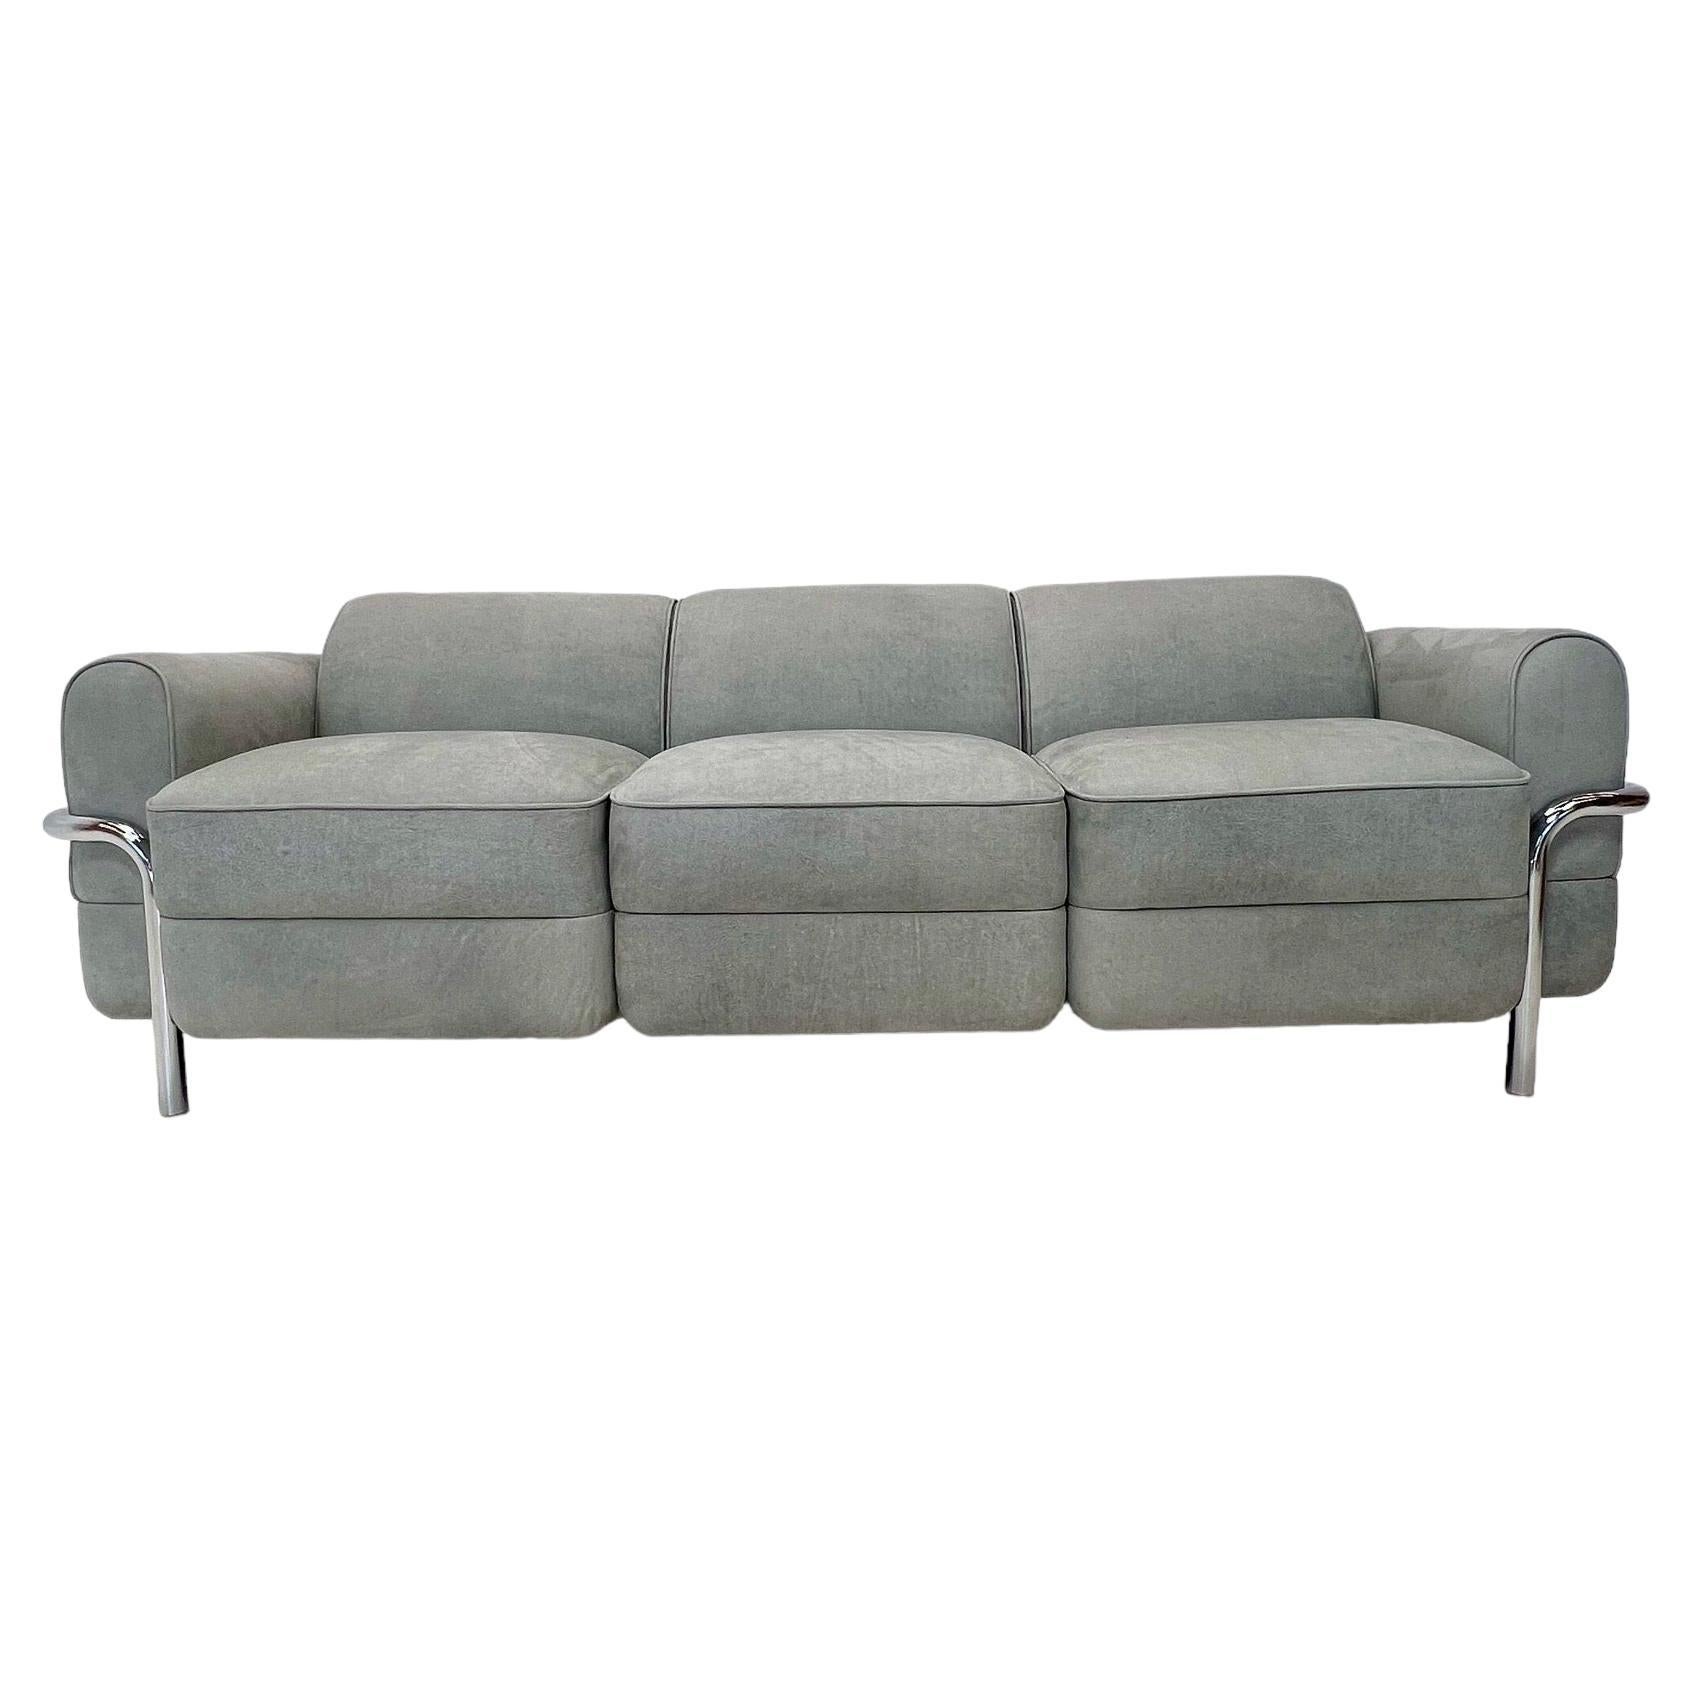 LC2 Style Inspired Sofa in Distressed Suede Leather